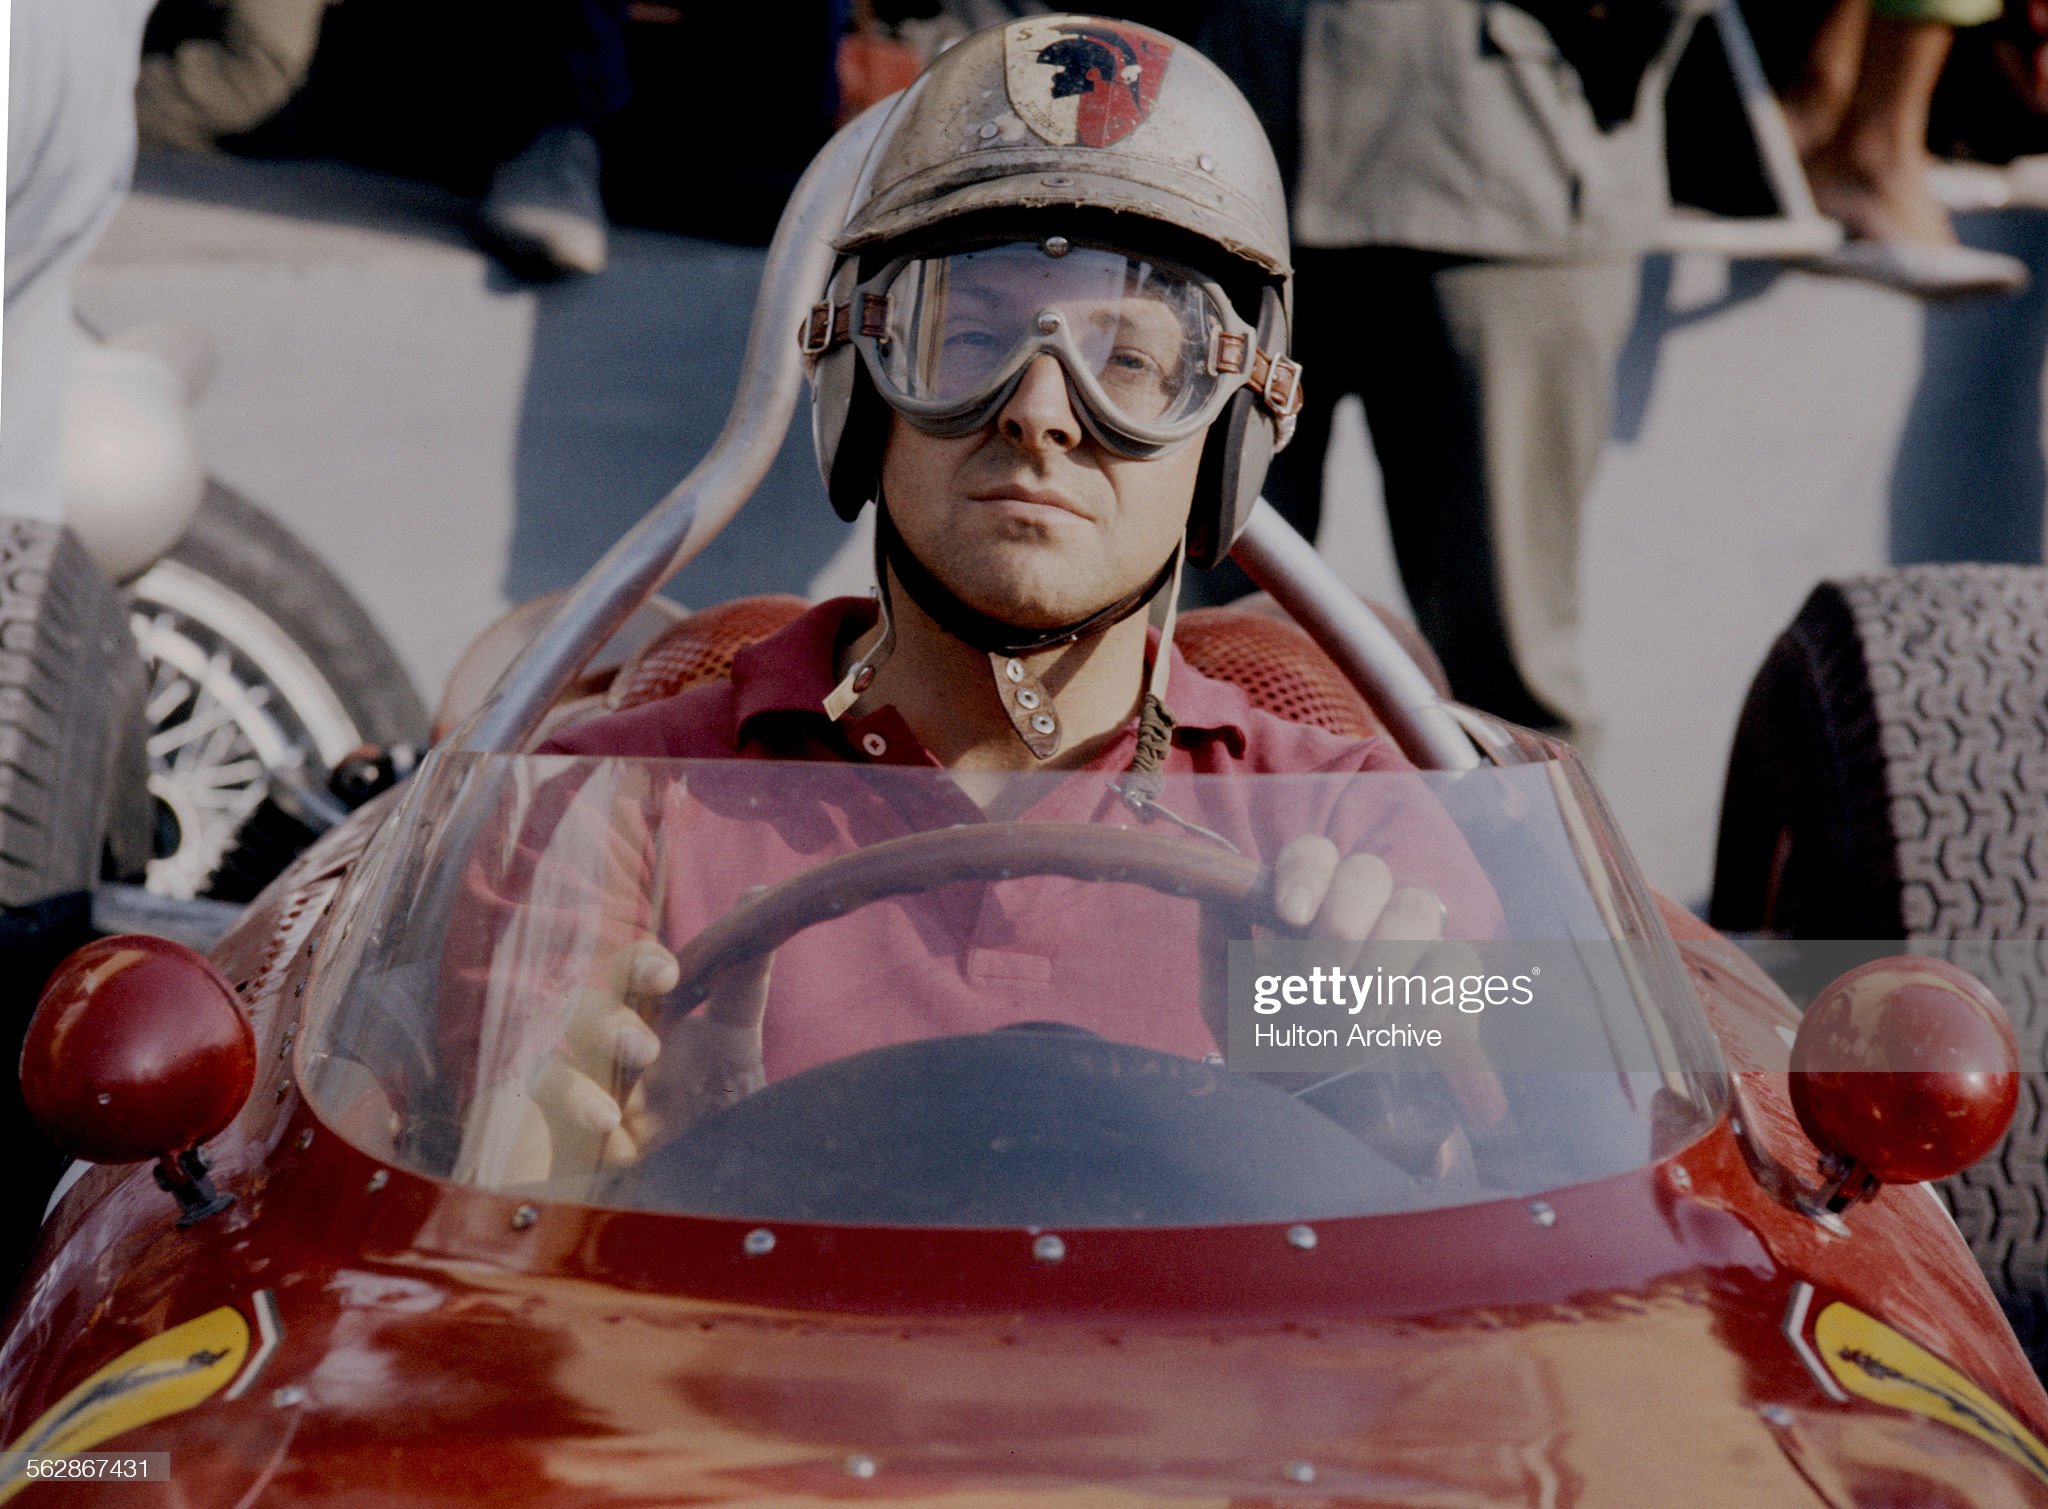 Wolfgang von Trips, driver of the n.4 Ferrari 156 V6, awaits the start of the Italian Grand Prix on 10 September 1961 at the Autodromo Nazionale Monza, Italy.